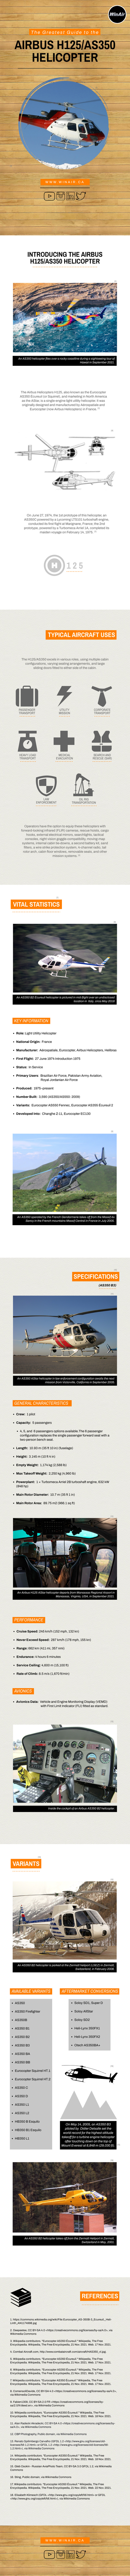 The Greatest Guide to the Airbus AS350 Helicopter - Infographic - WinAir - Aviation Management Software